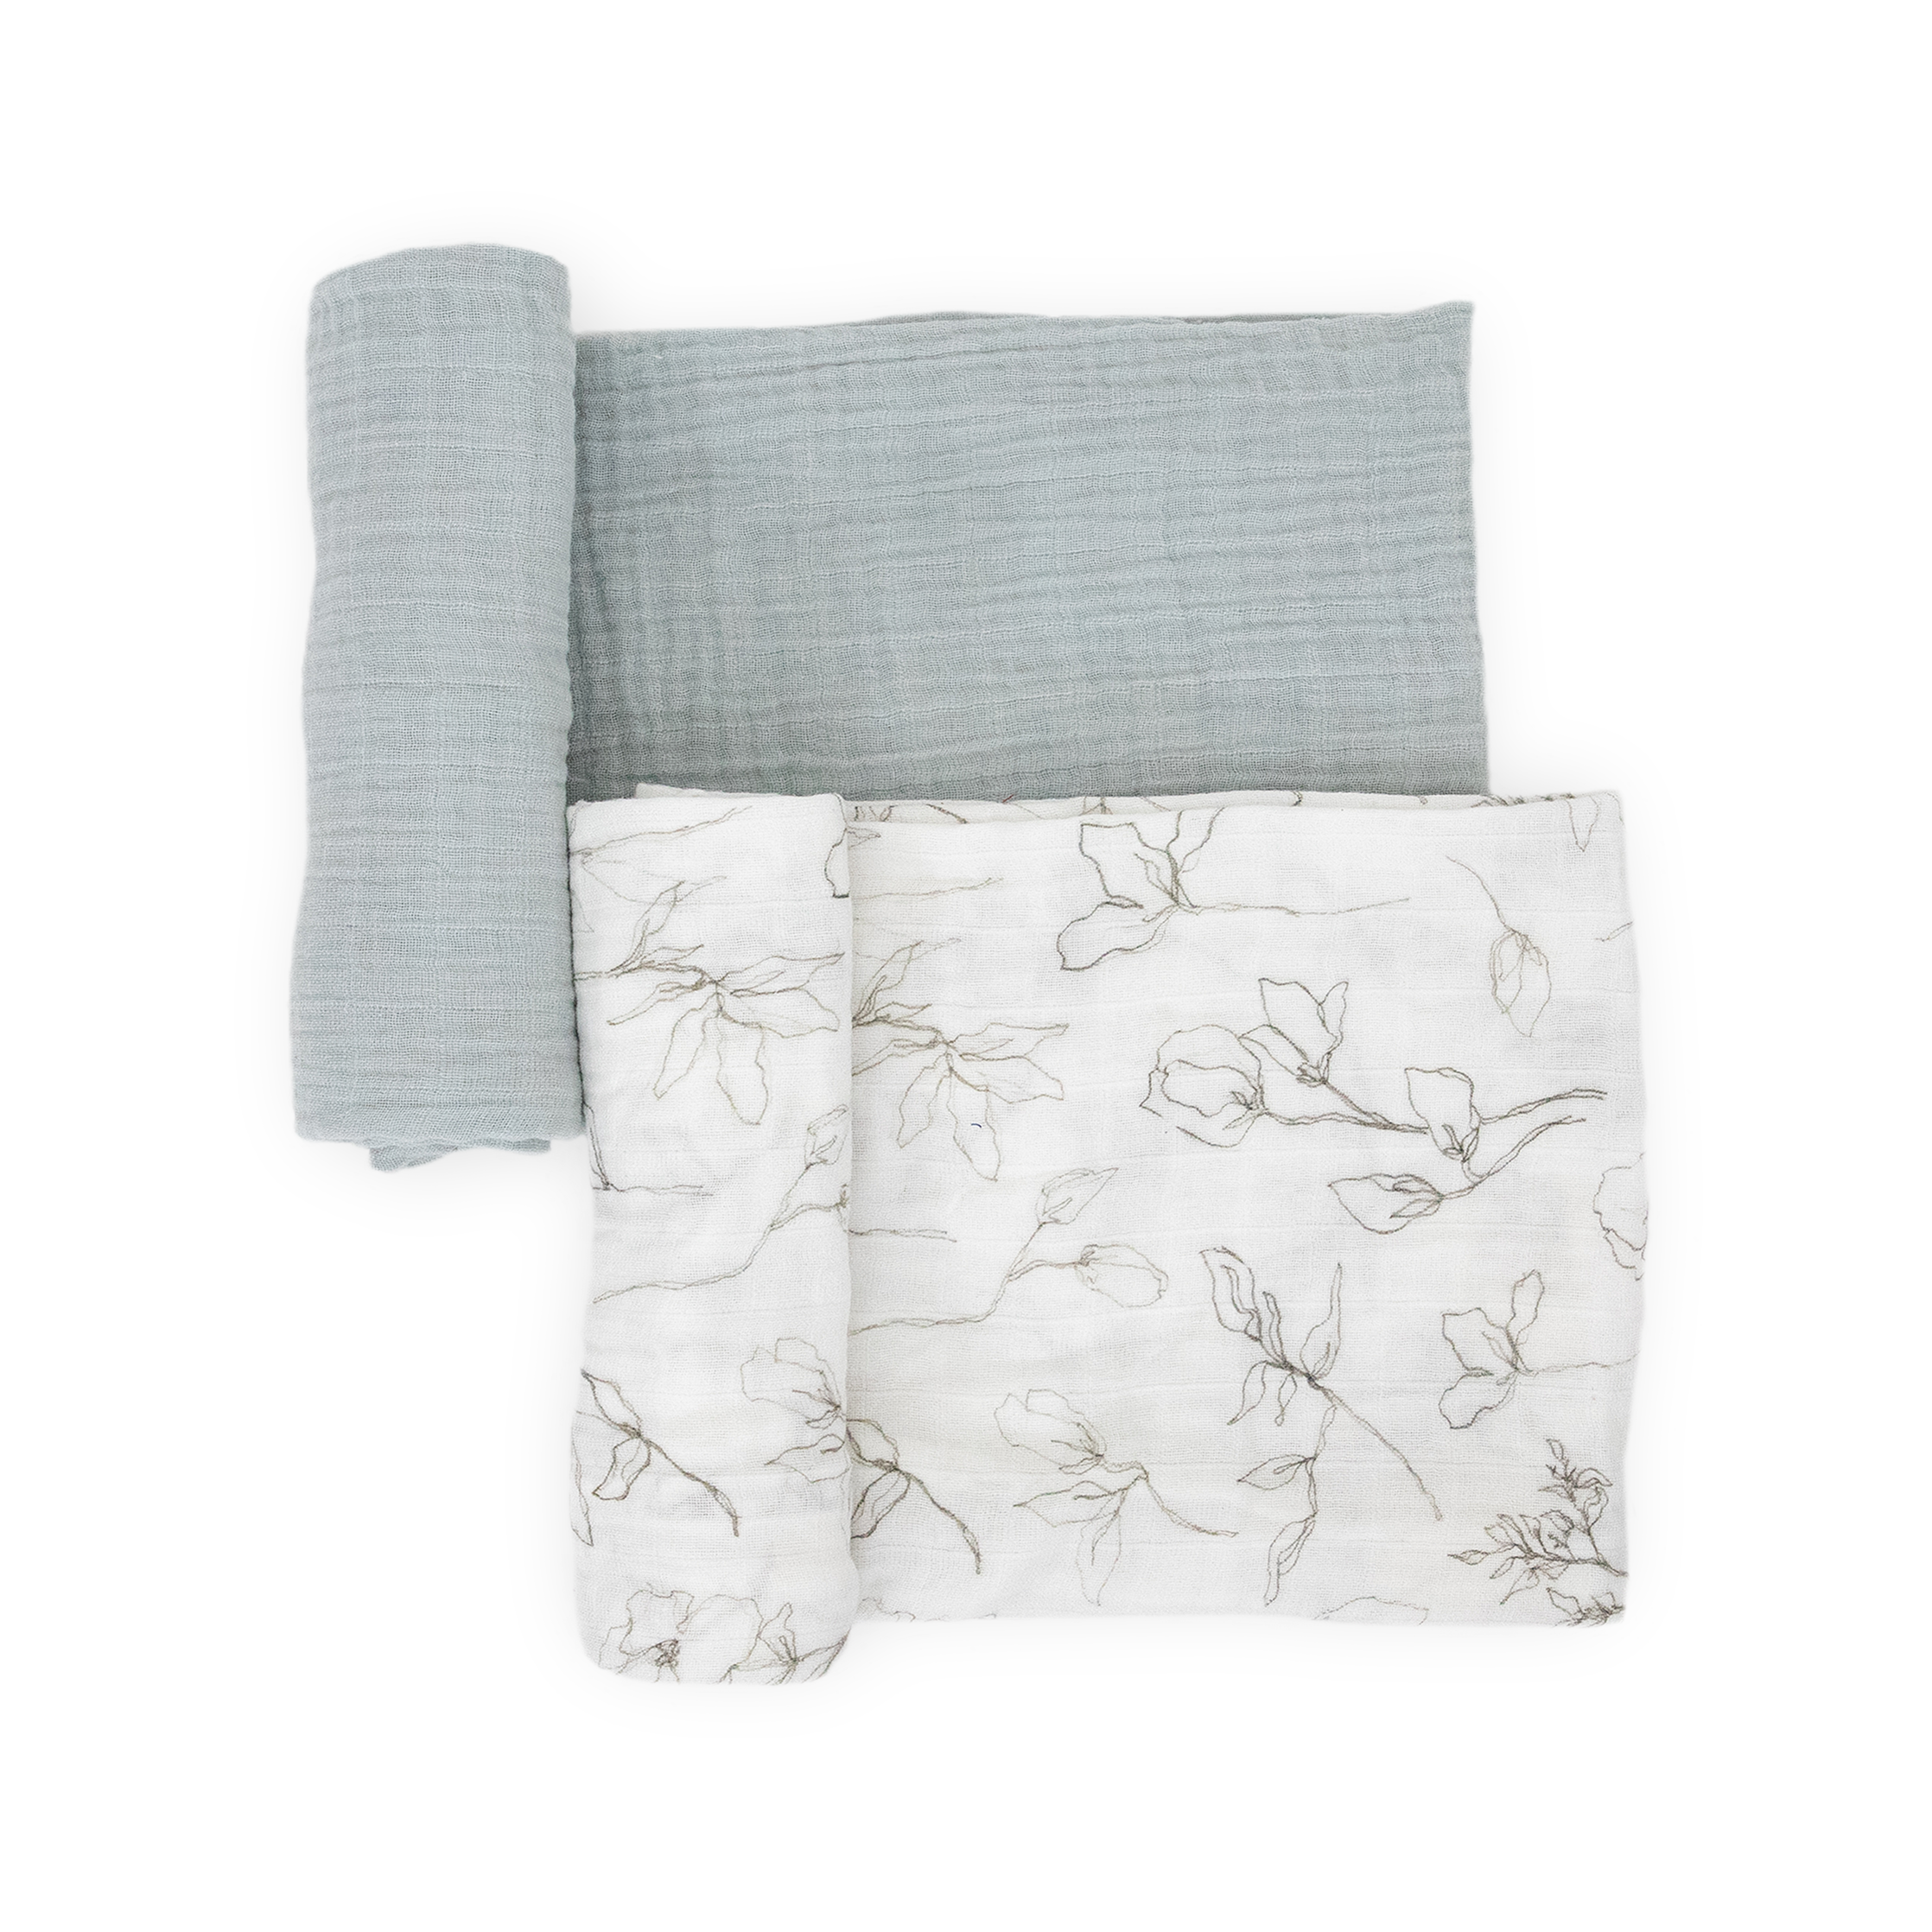 Organic Cotton Muslin Swaddle Blanket 2 Pack - Pencil Floral